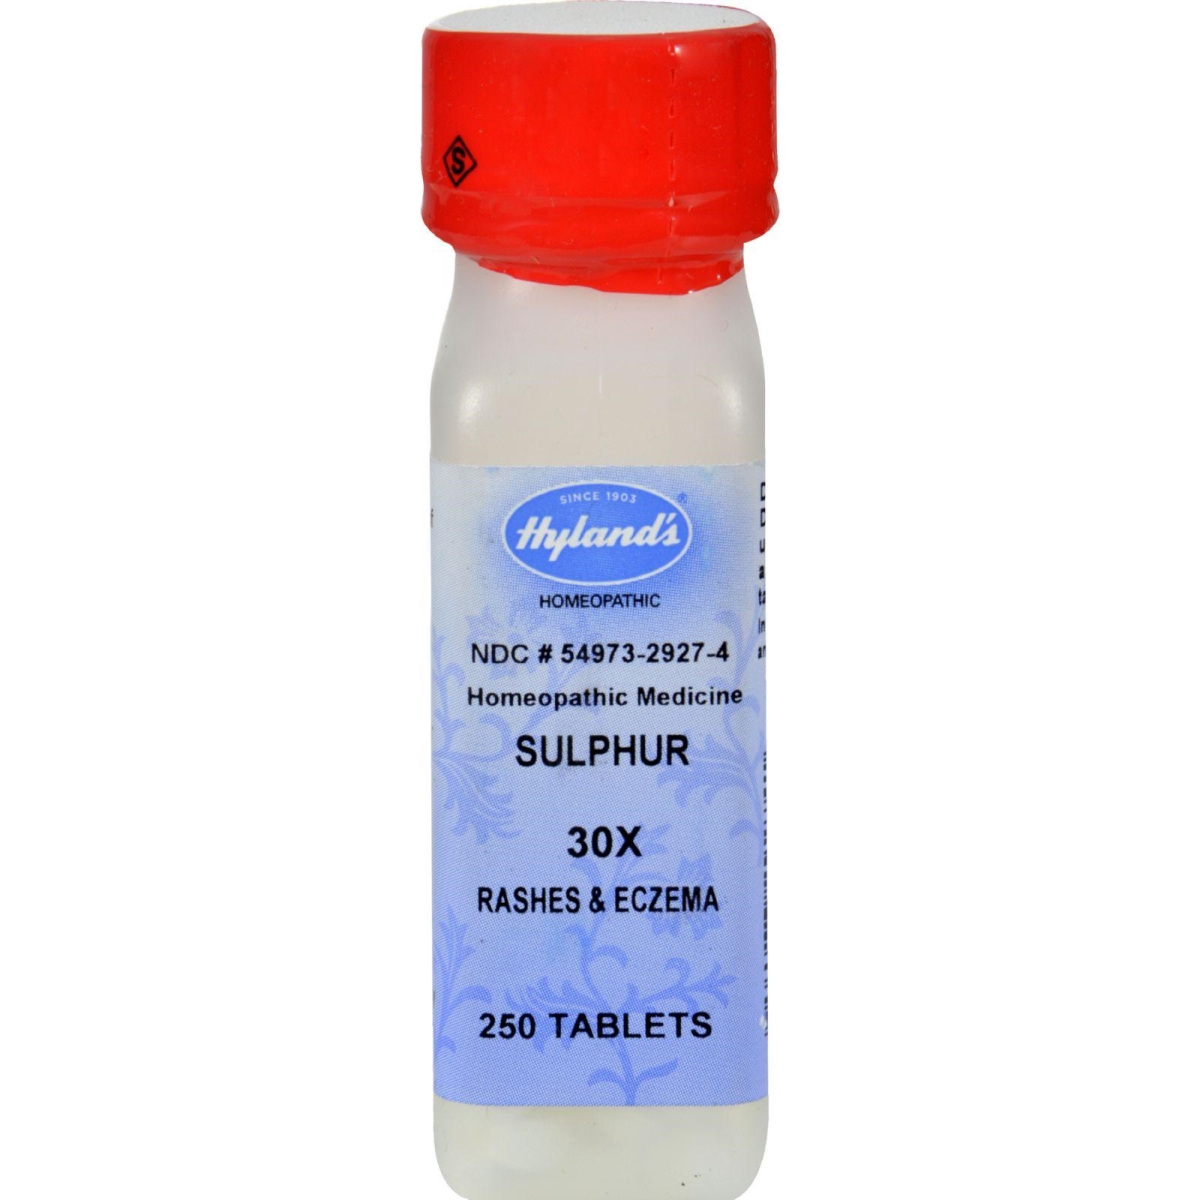 Hg0130583 Homeopathic Sulphur 30x, 250 Tablets